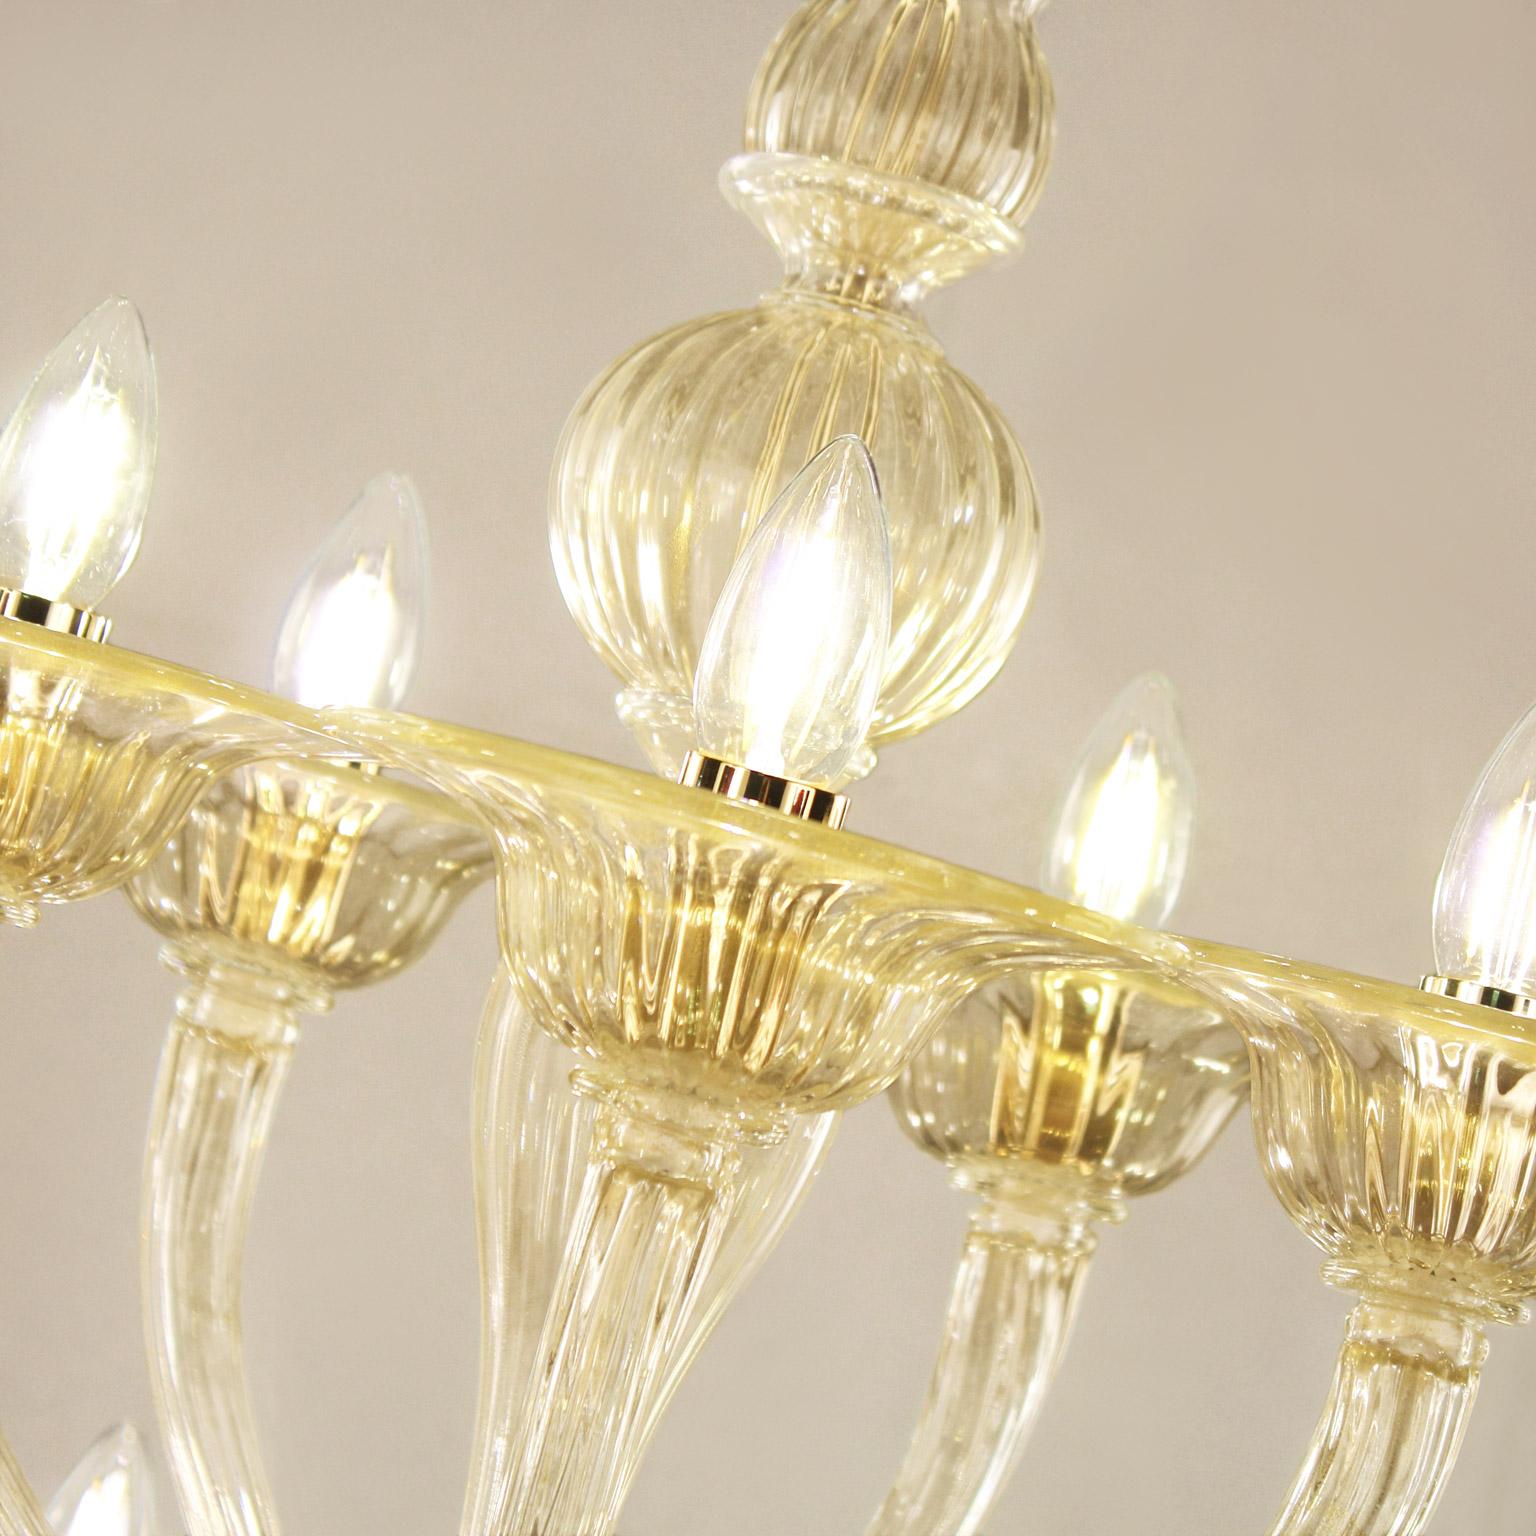 Italian Chandelier 10+ 5 Arms Golden Artistic Glass Simplicissimus 360 by Multiforme For Sale